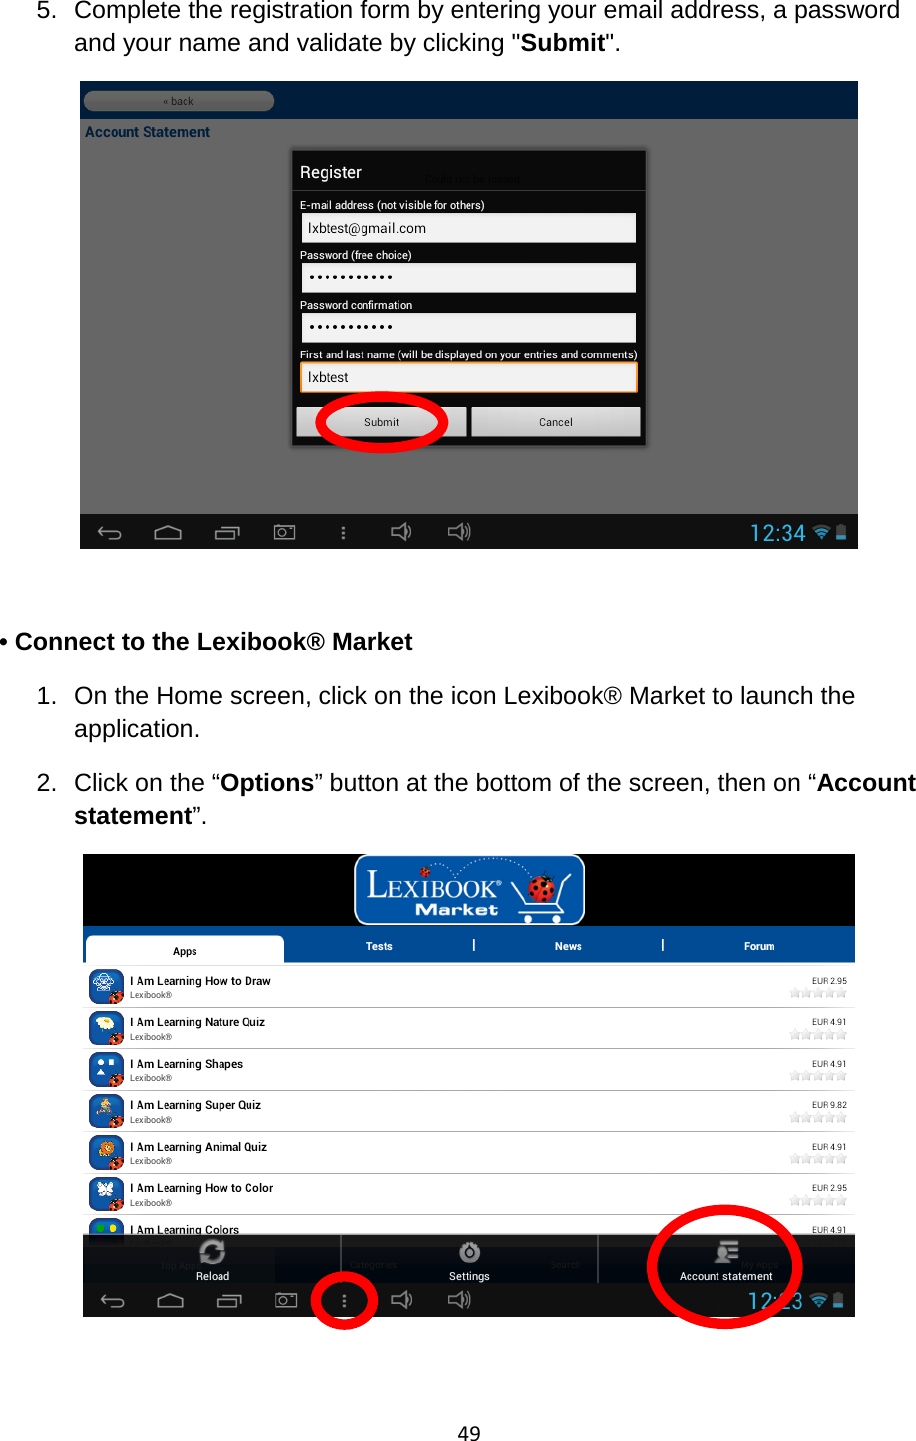 49  5. Complete the registration form by entering your email address, a password and your name and validate by clicking &quot;Submit&quot;.   • Connect to the Lexibook® Market 1. On the Home screen, click on the icon Lexibook® Market to launch the application. 2. Click on the “Options” button at the bottom of the screen, then on “Account statement”.  